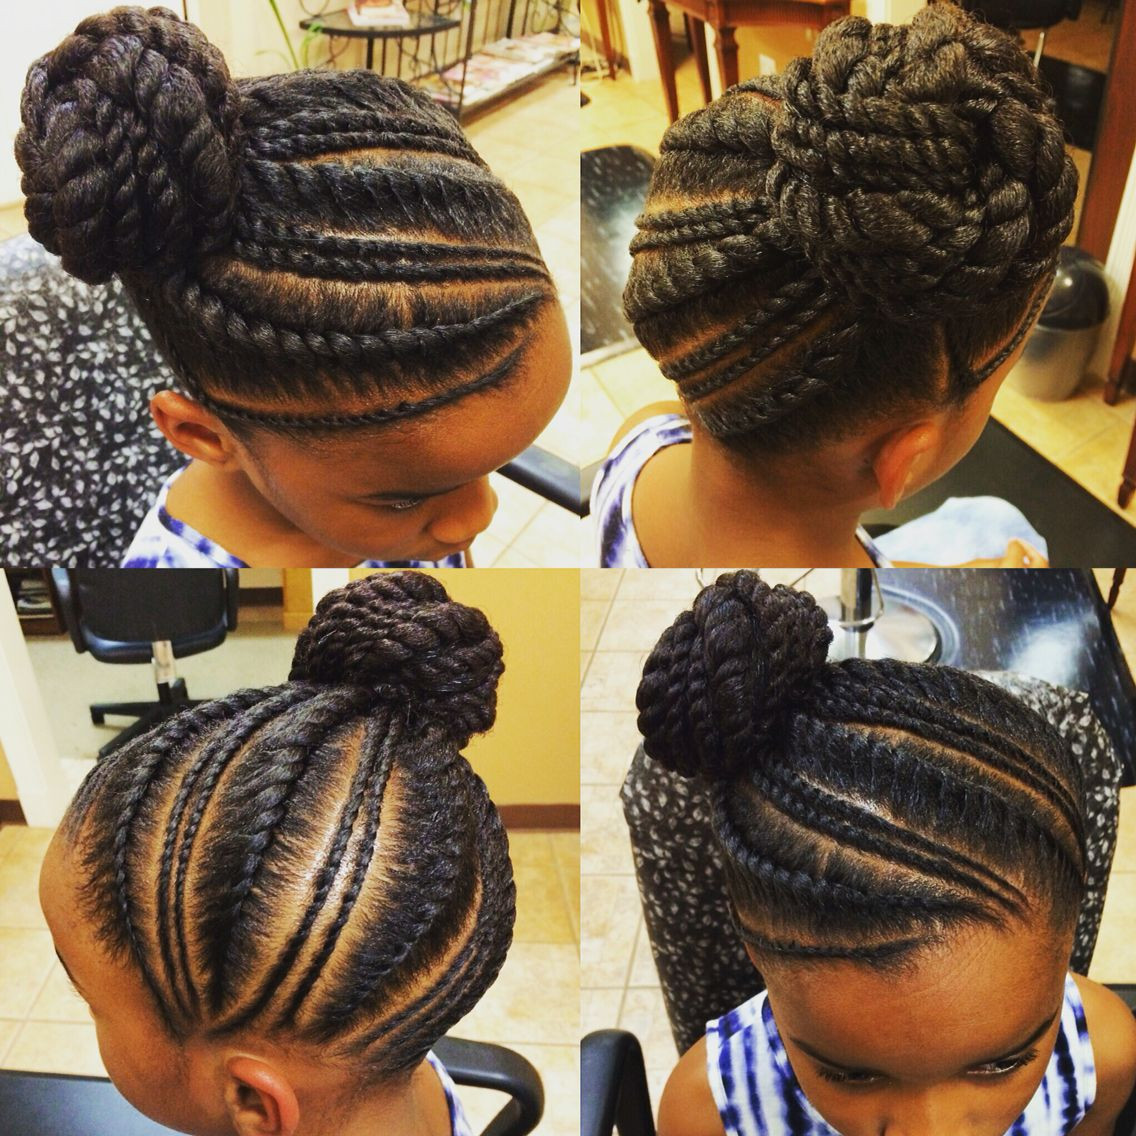 Little Girl Flat Twist Hairstyles
 These 3 Cute Flat Twist Hairstyles Take Winning Prize